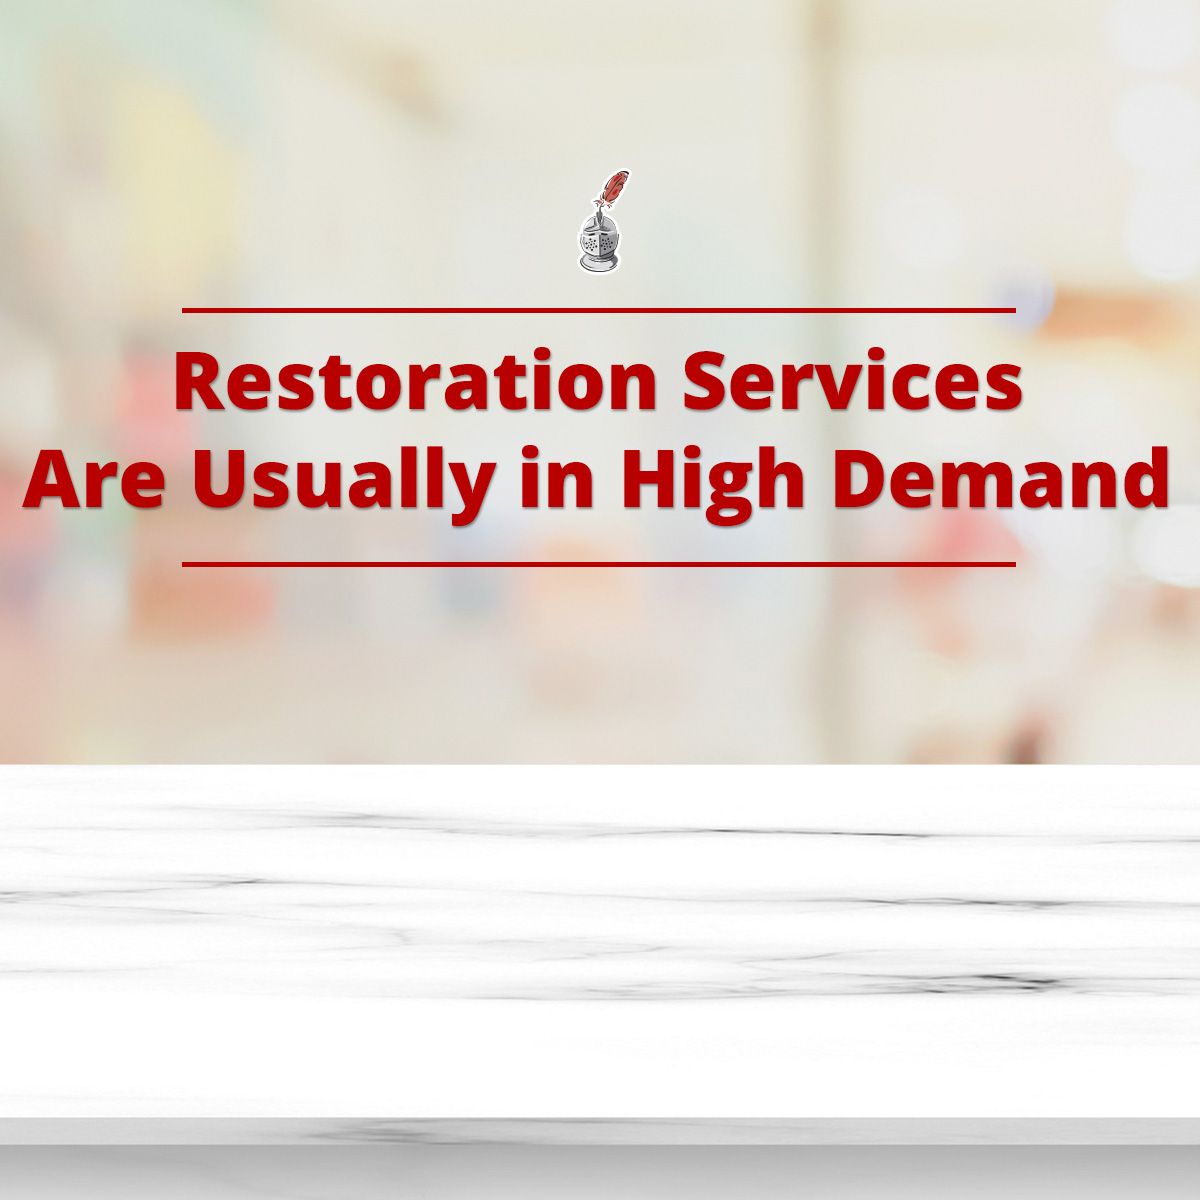 Restoration Services Are Usually in High Demand